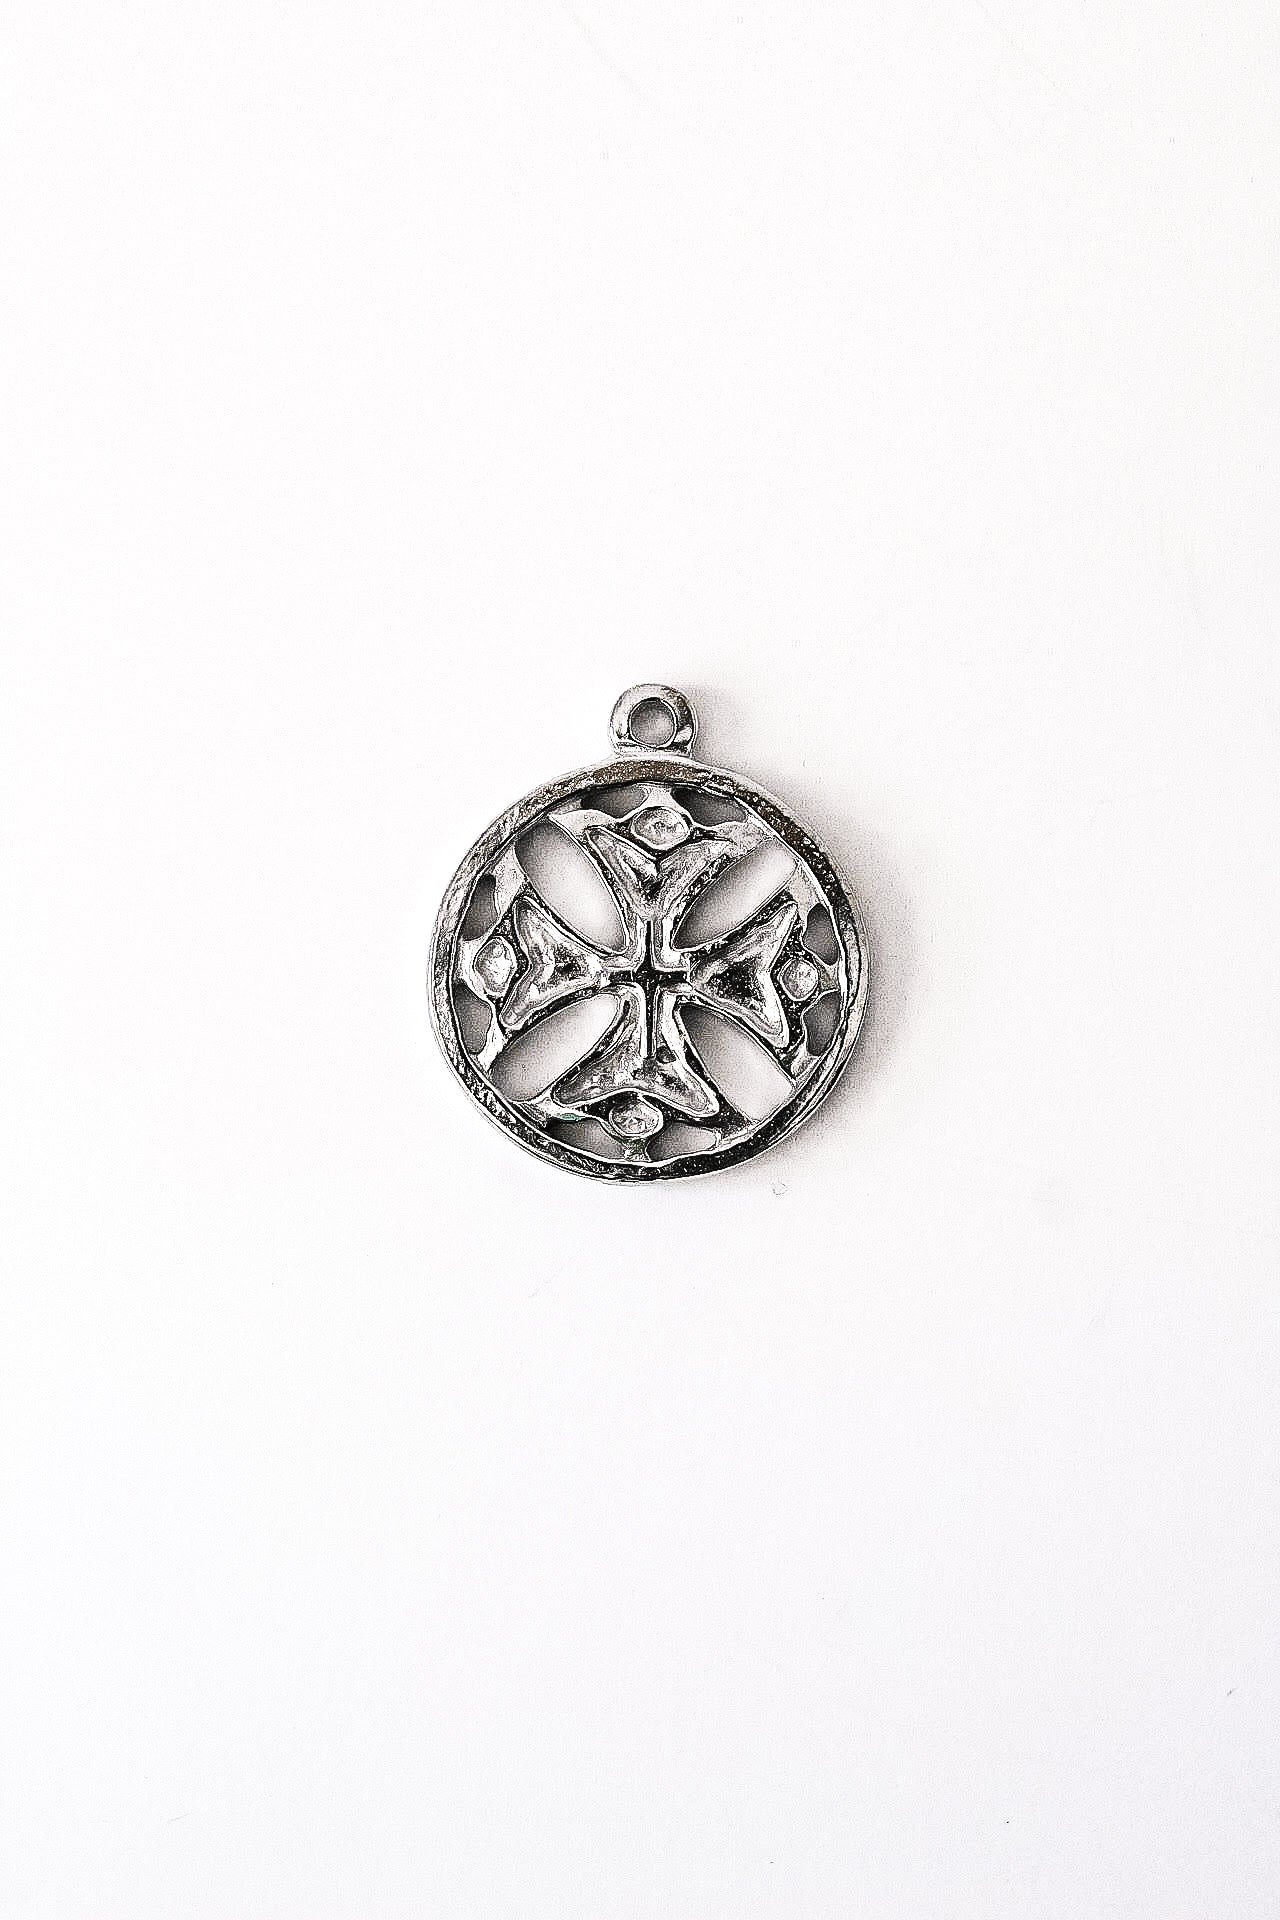 Cross Pendant Necklace - Religious Jewelry - Multiple Designs and Necklaces